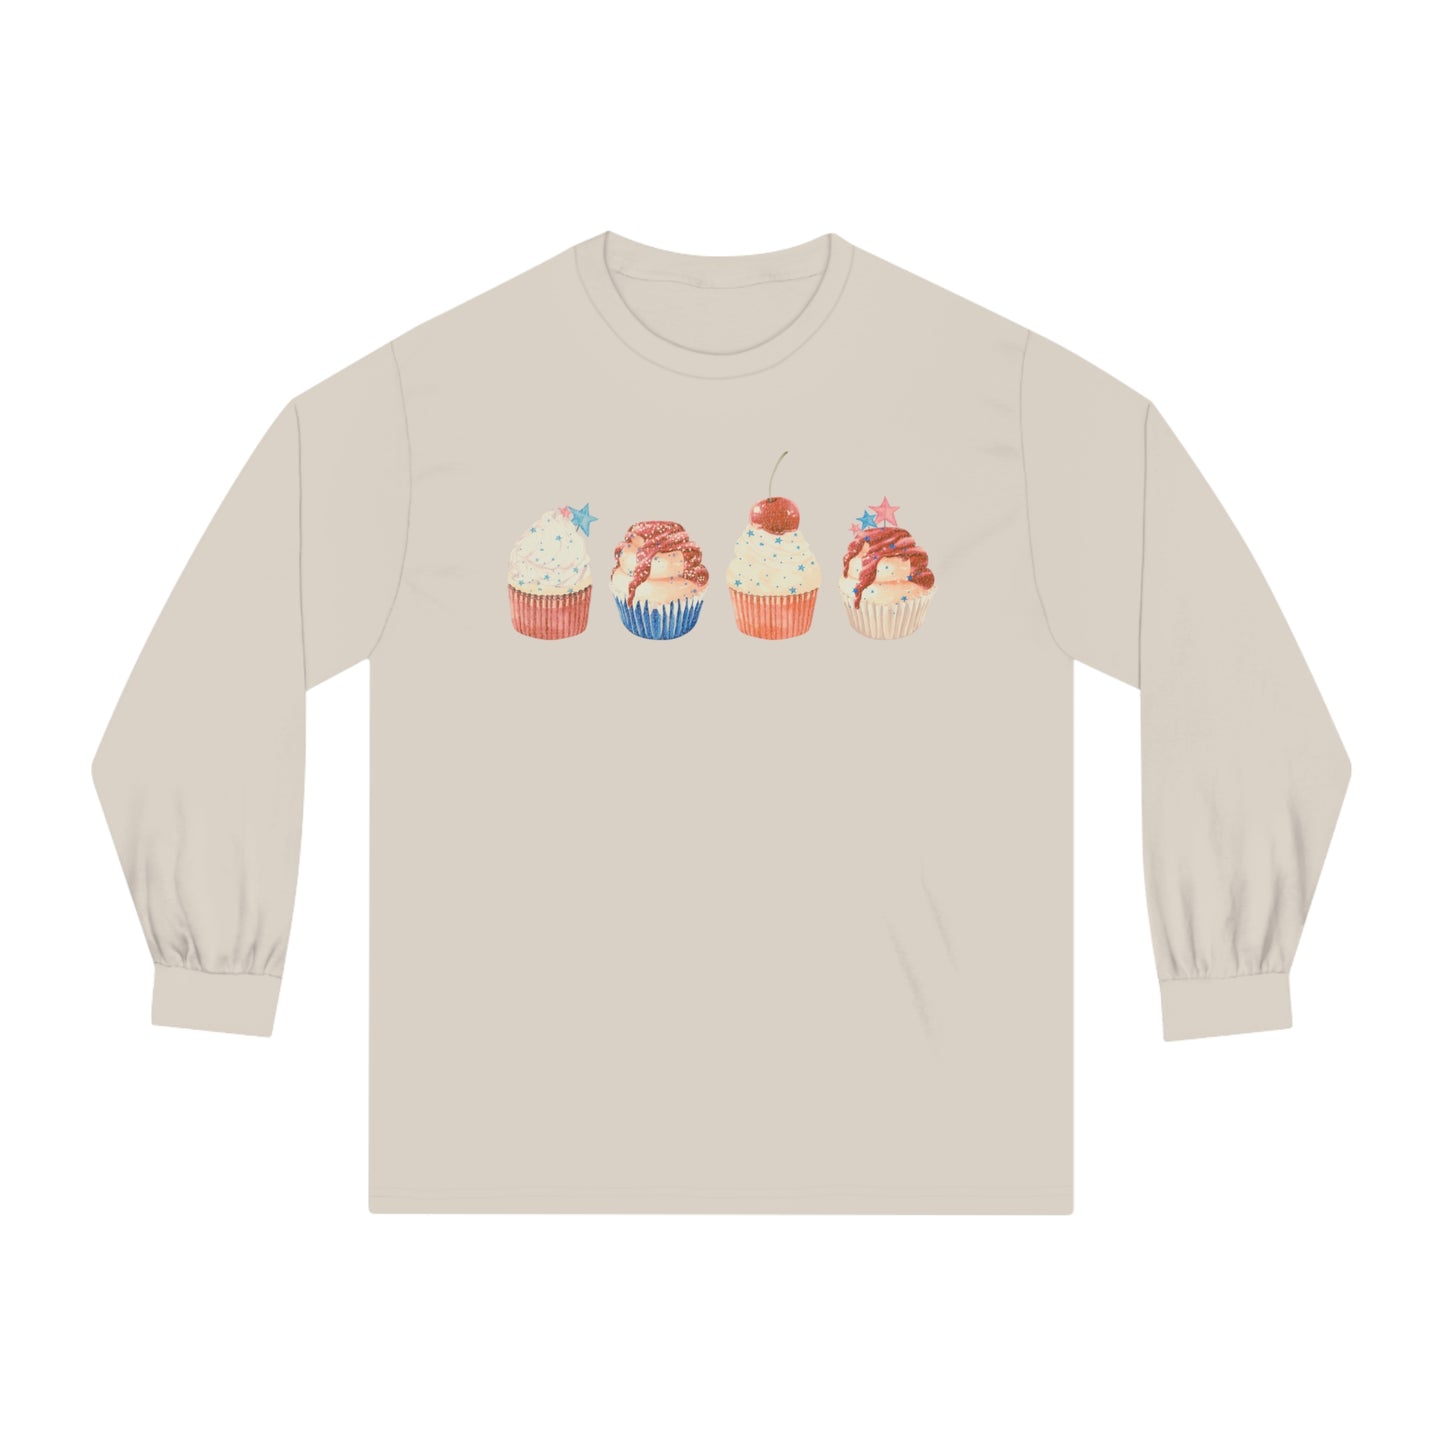 Fourth of July Cupcakes - Unisex Classic Long Sleeve T-Shirt